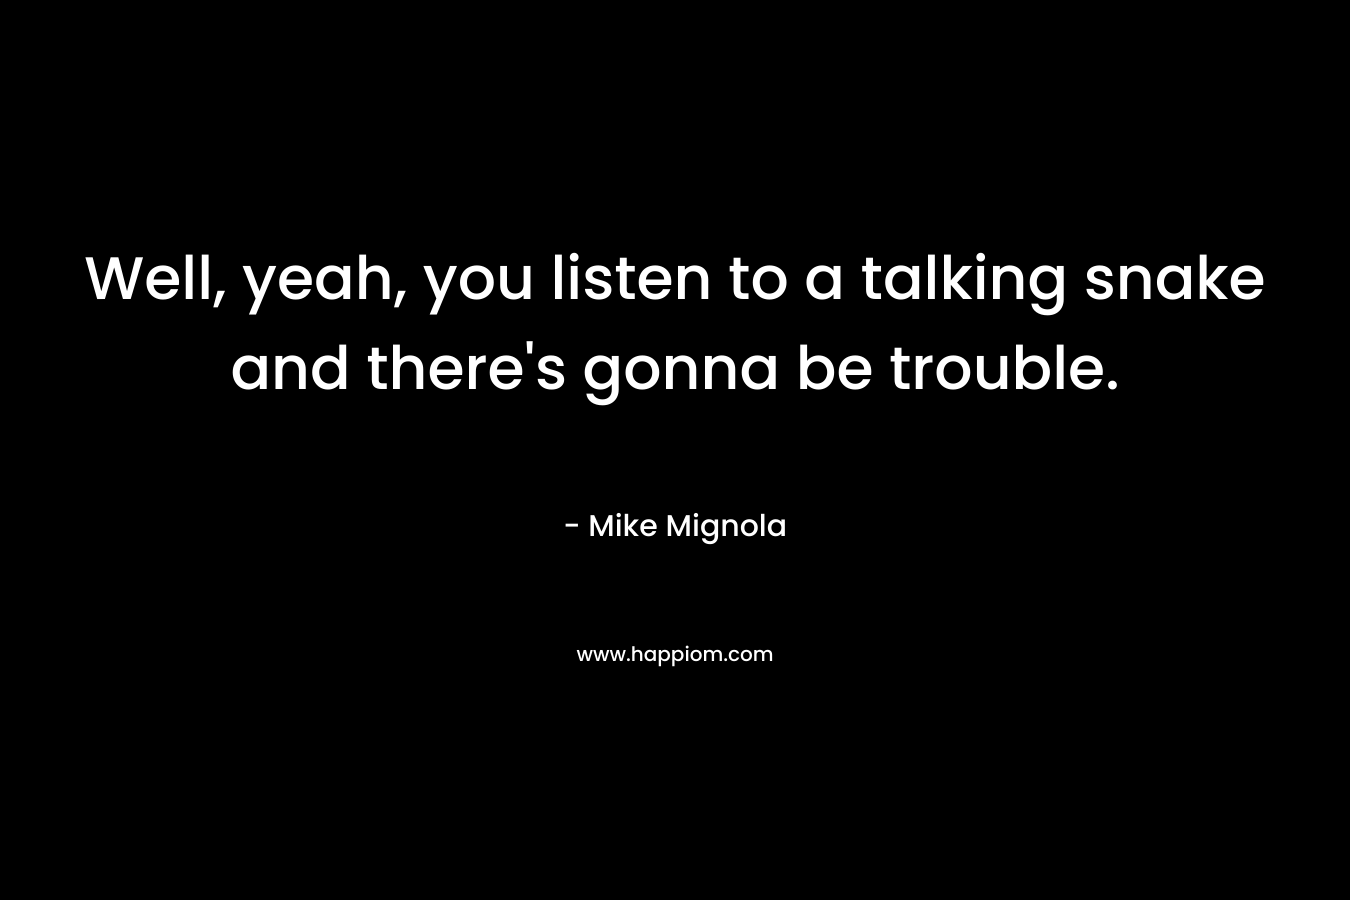 Well, yeah, you listen to a talking snake and there’s gonna be trouble. – Mike Mignola